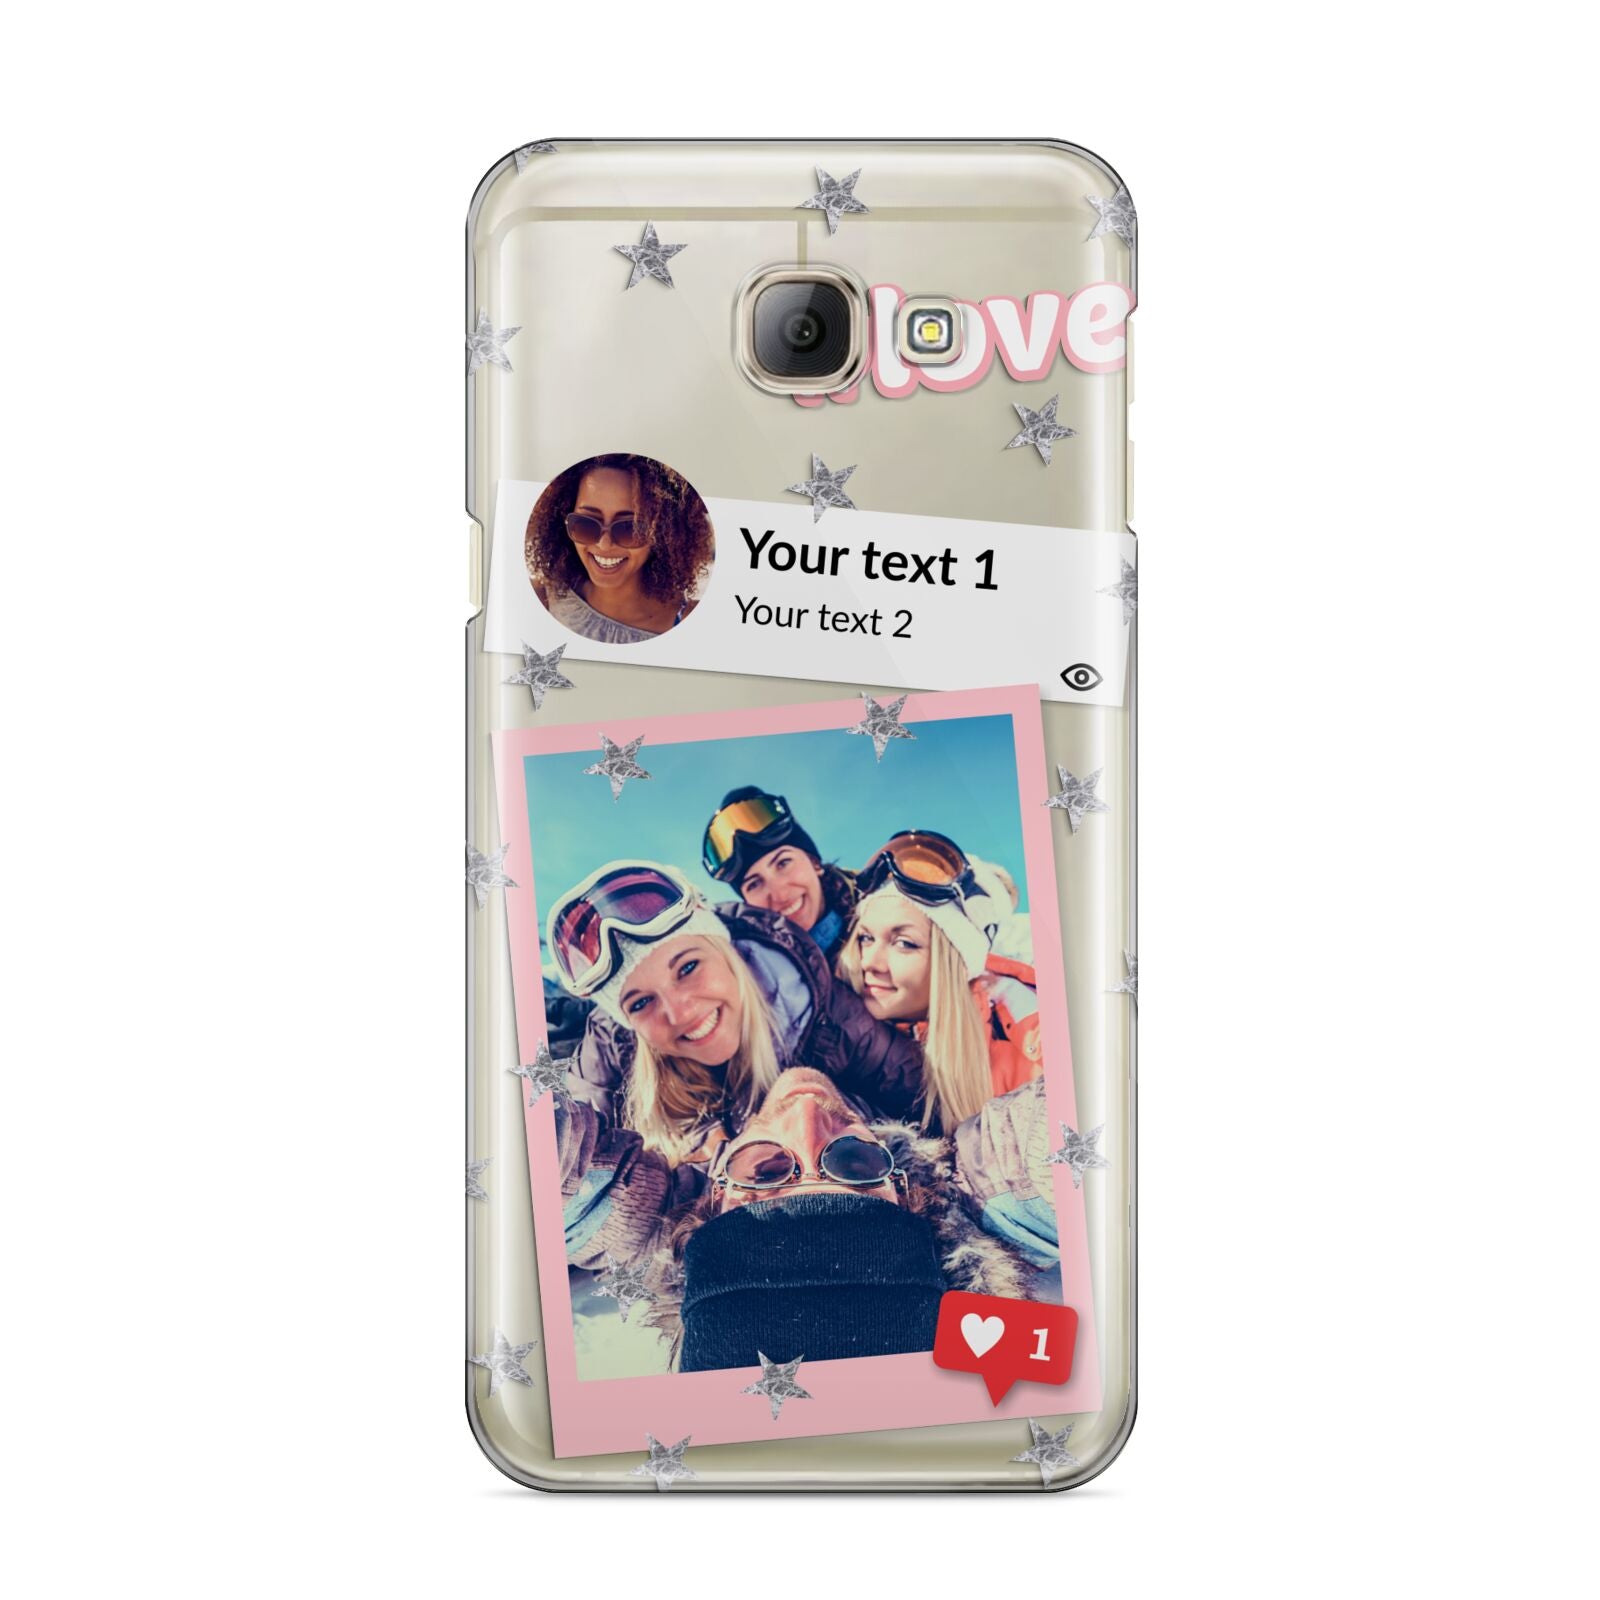 Starry Social Media Photo Montage Upload with Text Samsung Galaxy A8 2016 Case